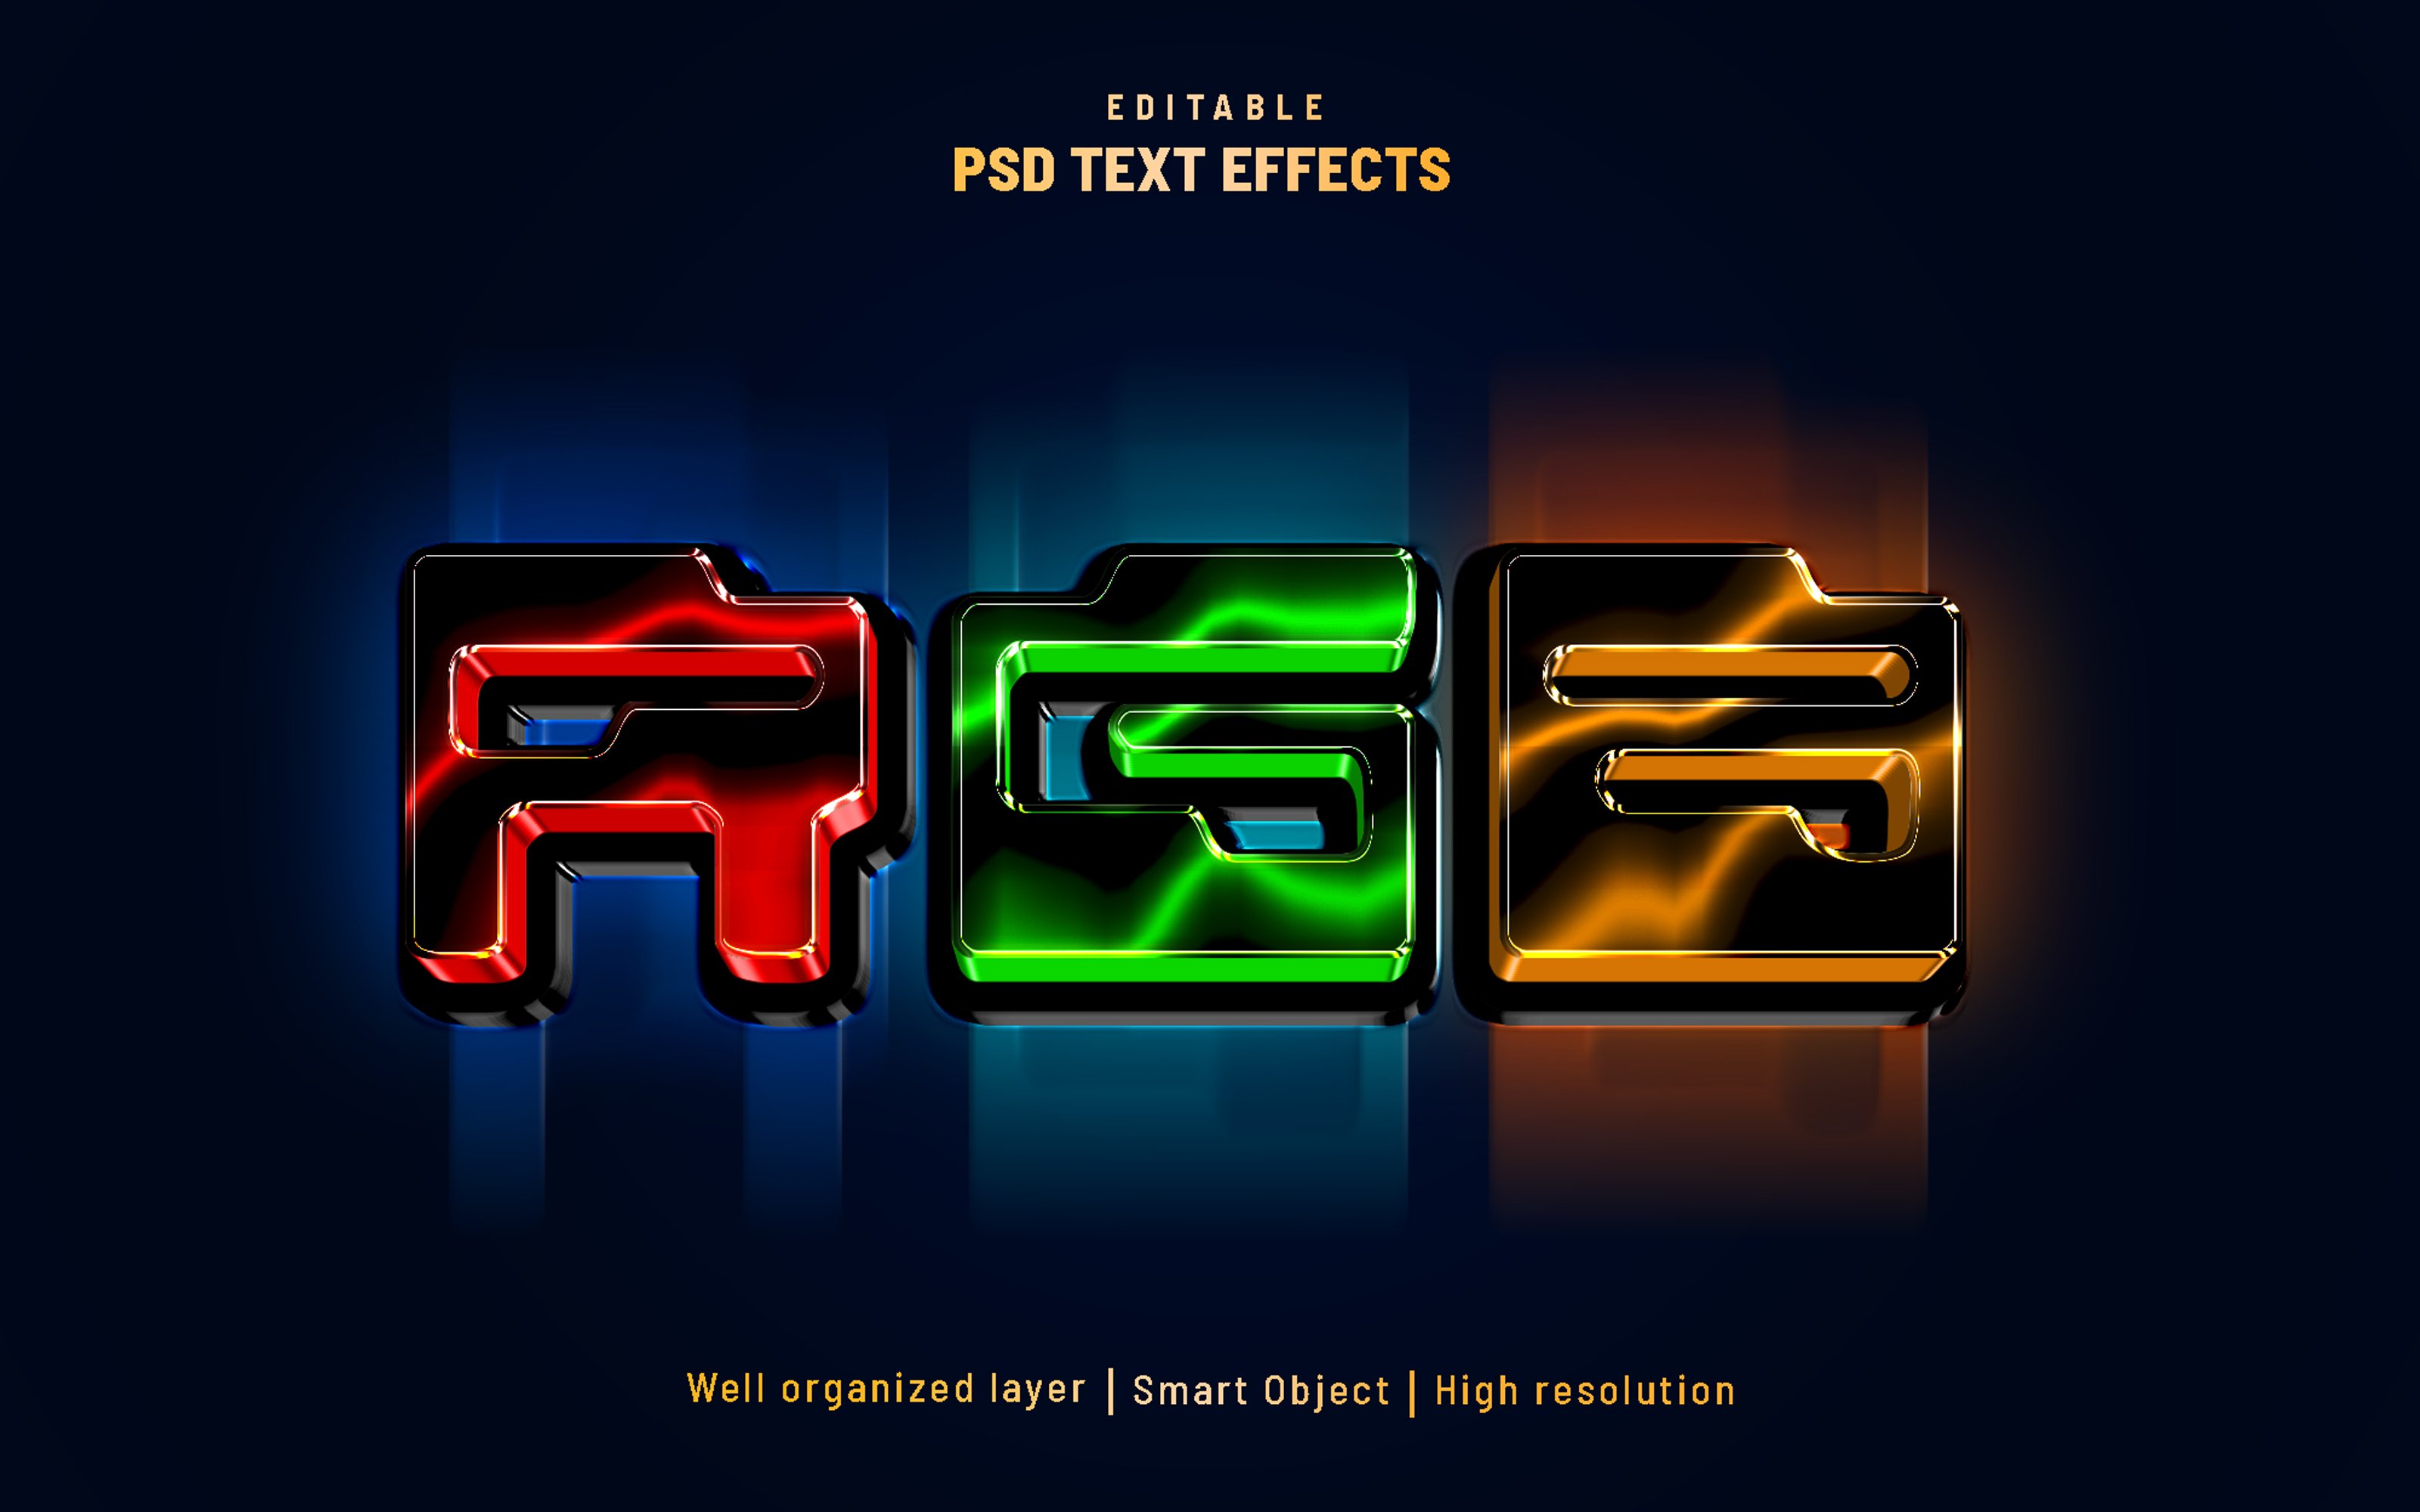 RGB editable text effect PSDcover image.